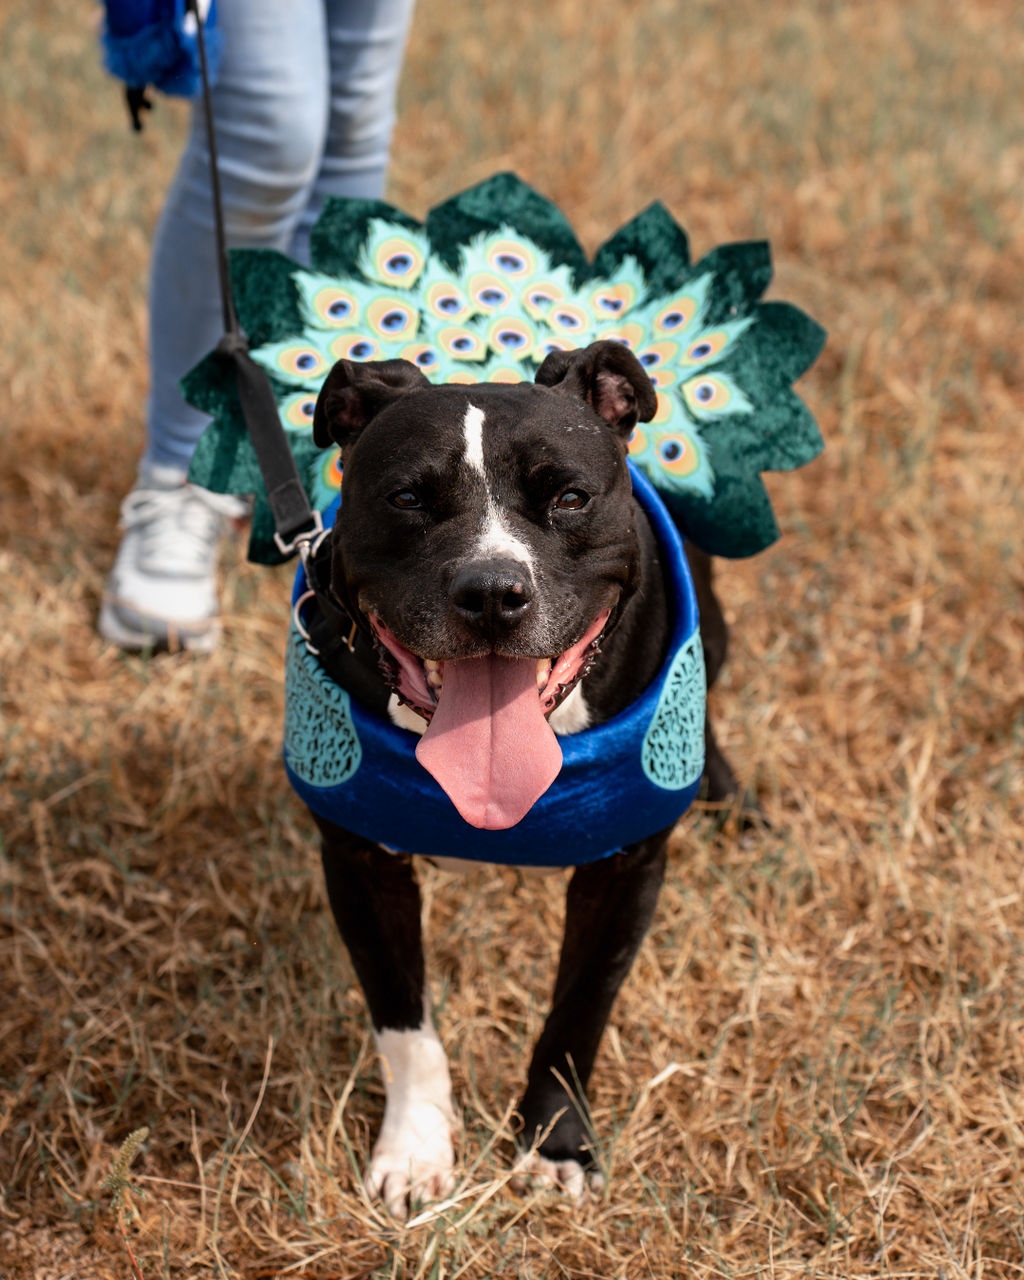 shelter dog wearing a costume